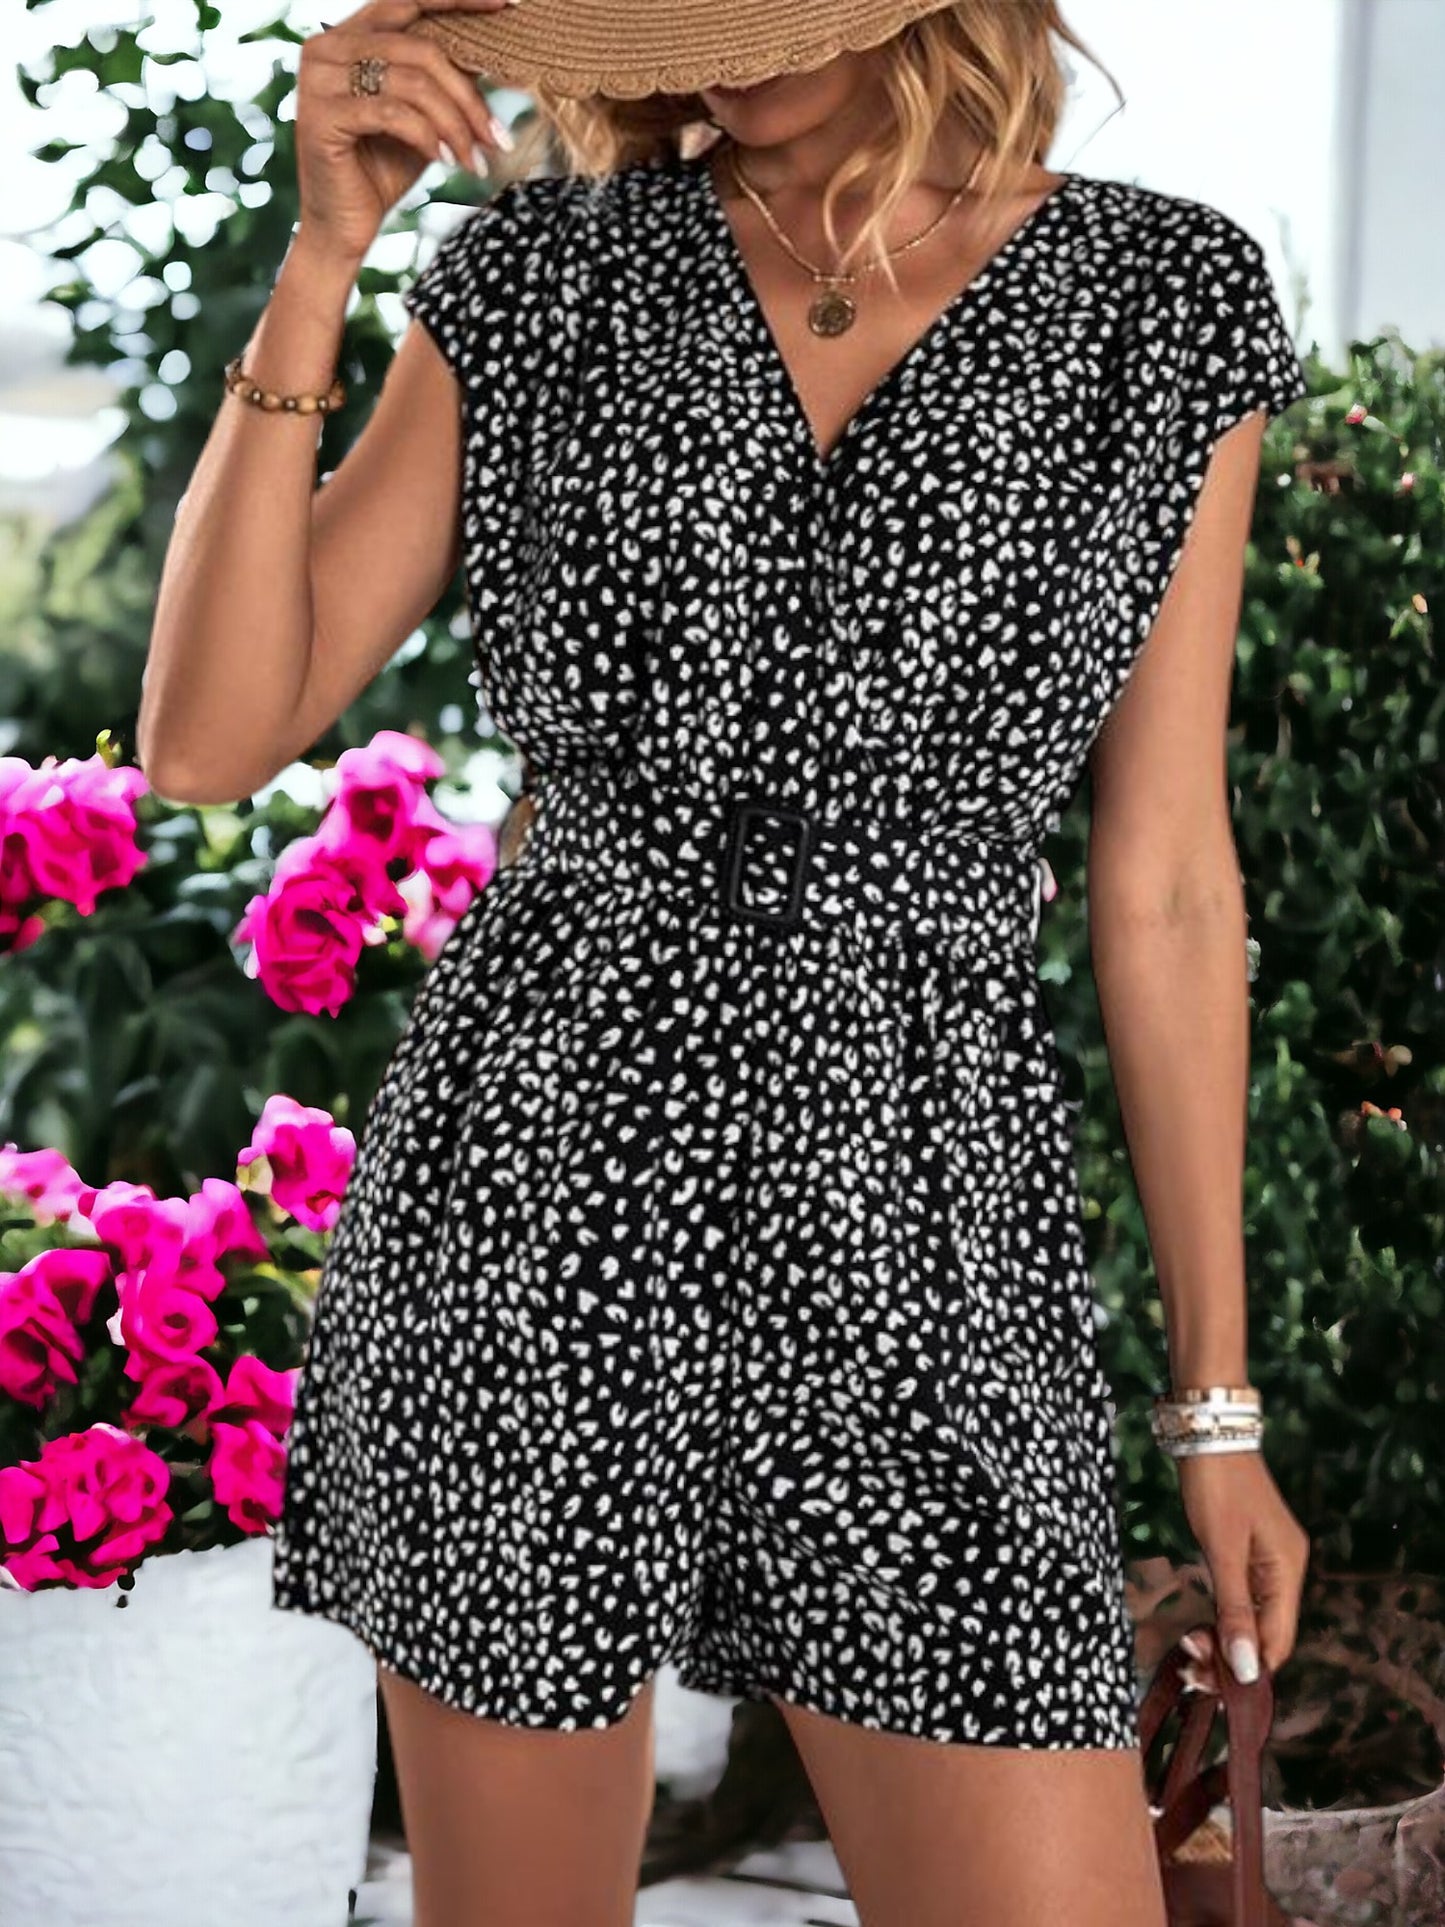 Dotted Pattern Batwing Sleeved Jumpsuit